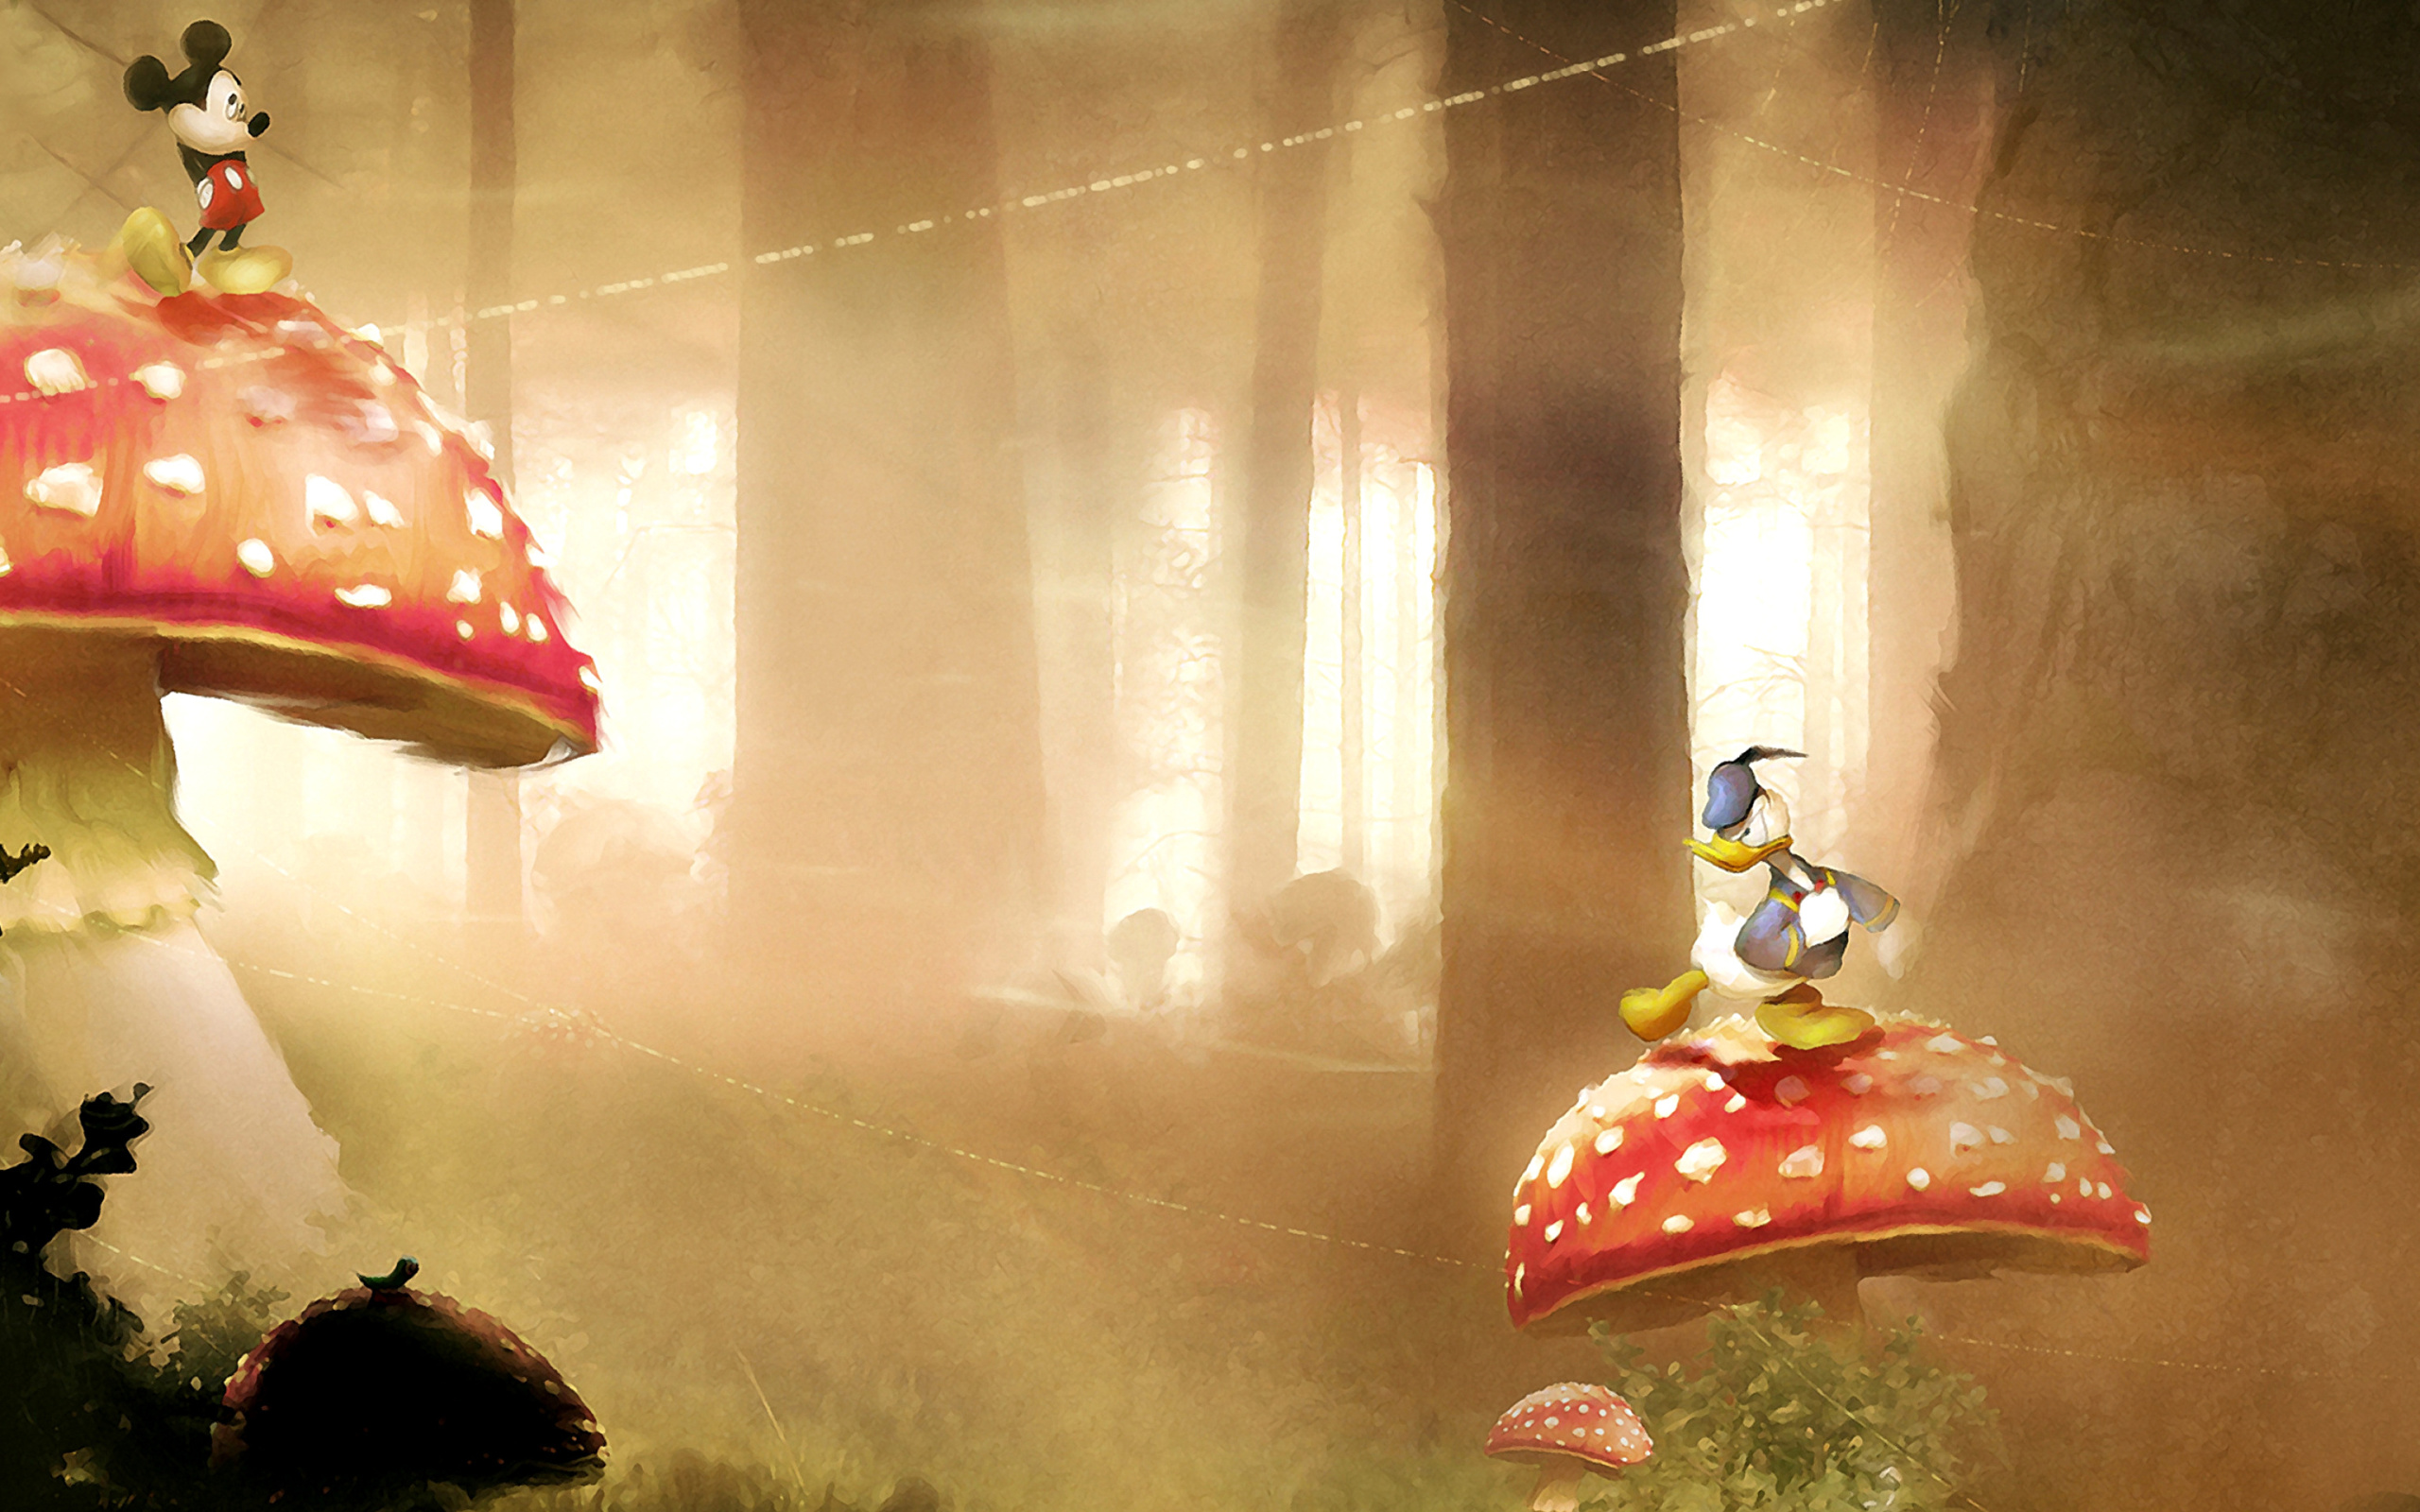 Das Mickey Mouse and Donald Duck Wallpaper 2560x1600